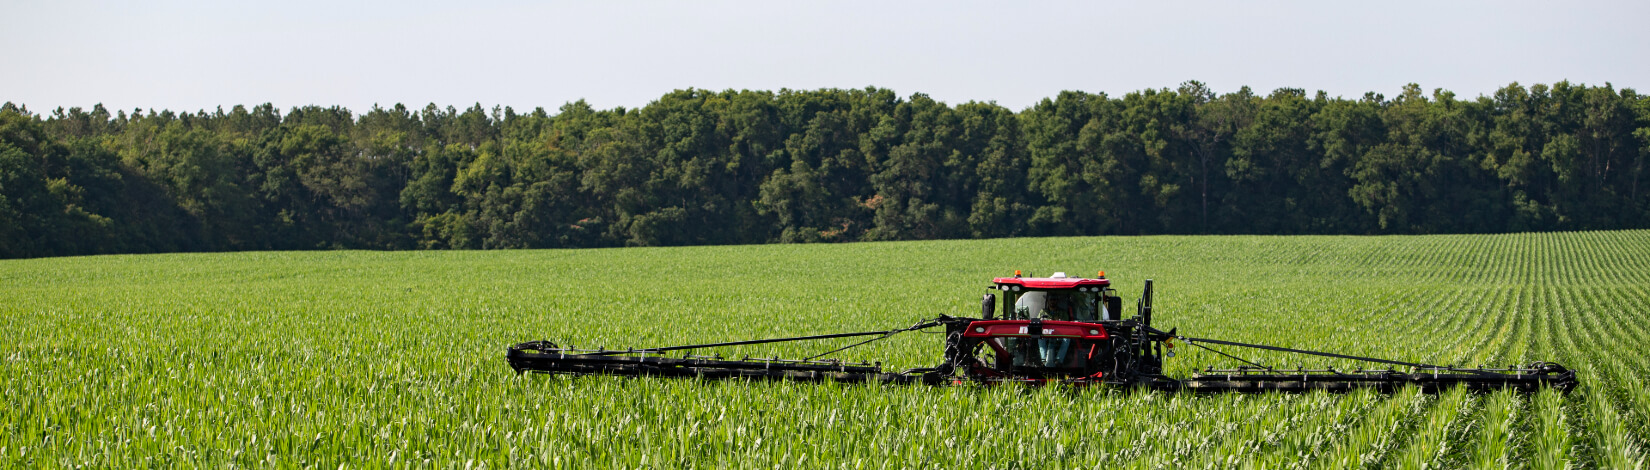 elevated tractor applying fertilizer to a corn field